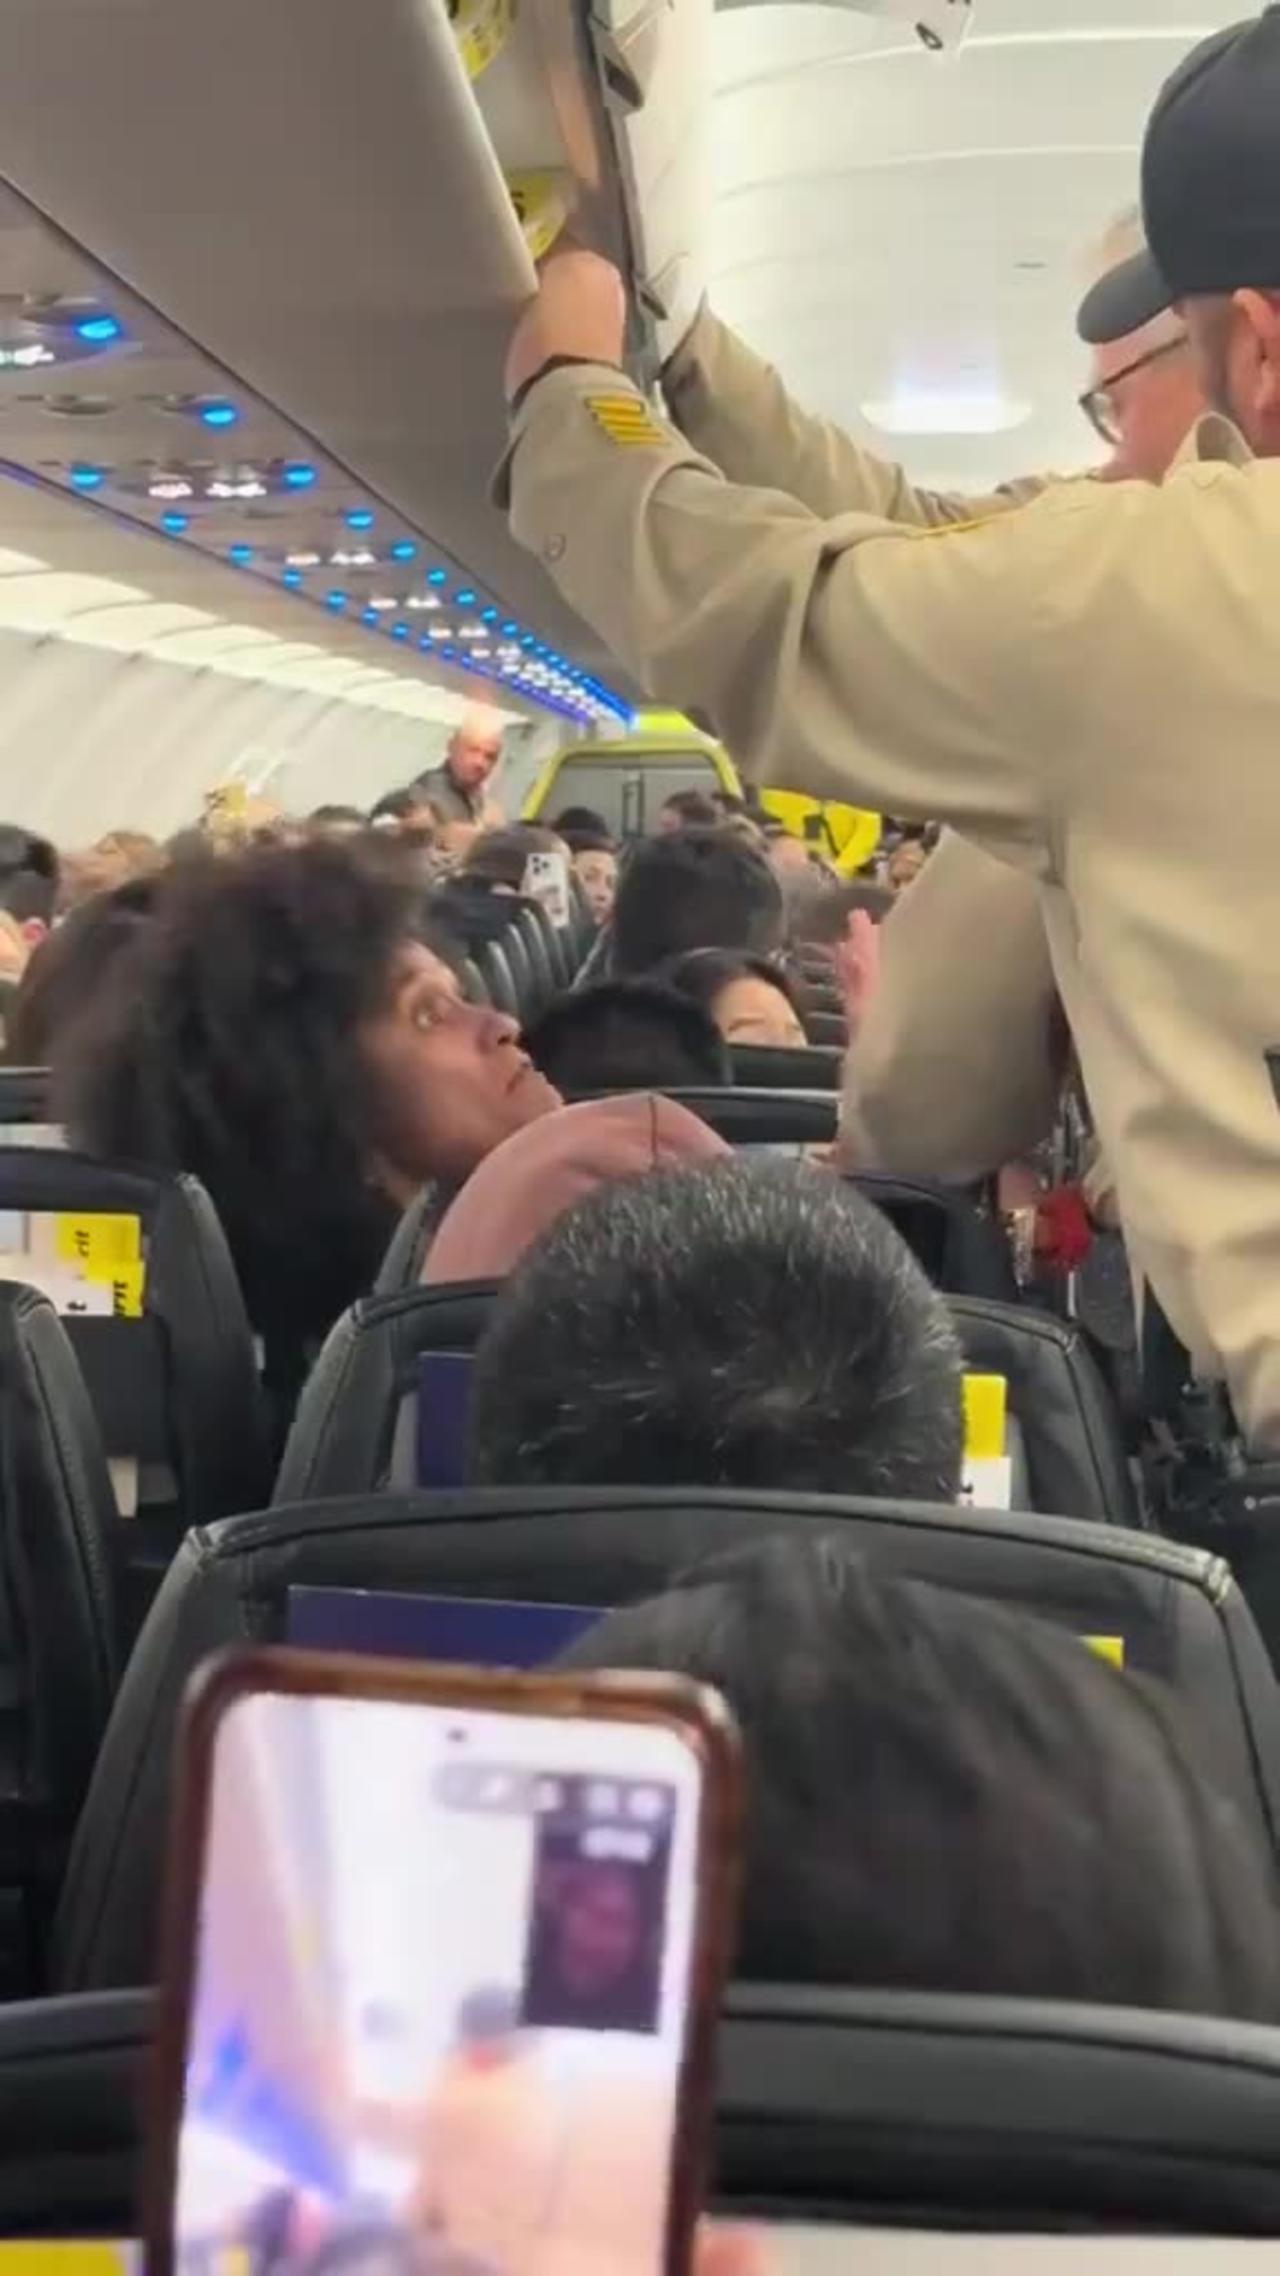 Nut job on an airline and she uses the old I can't breath trick